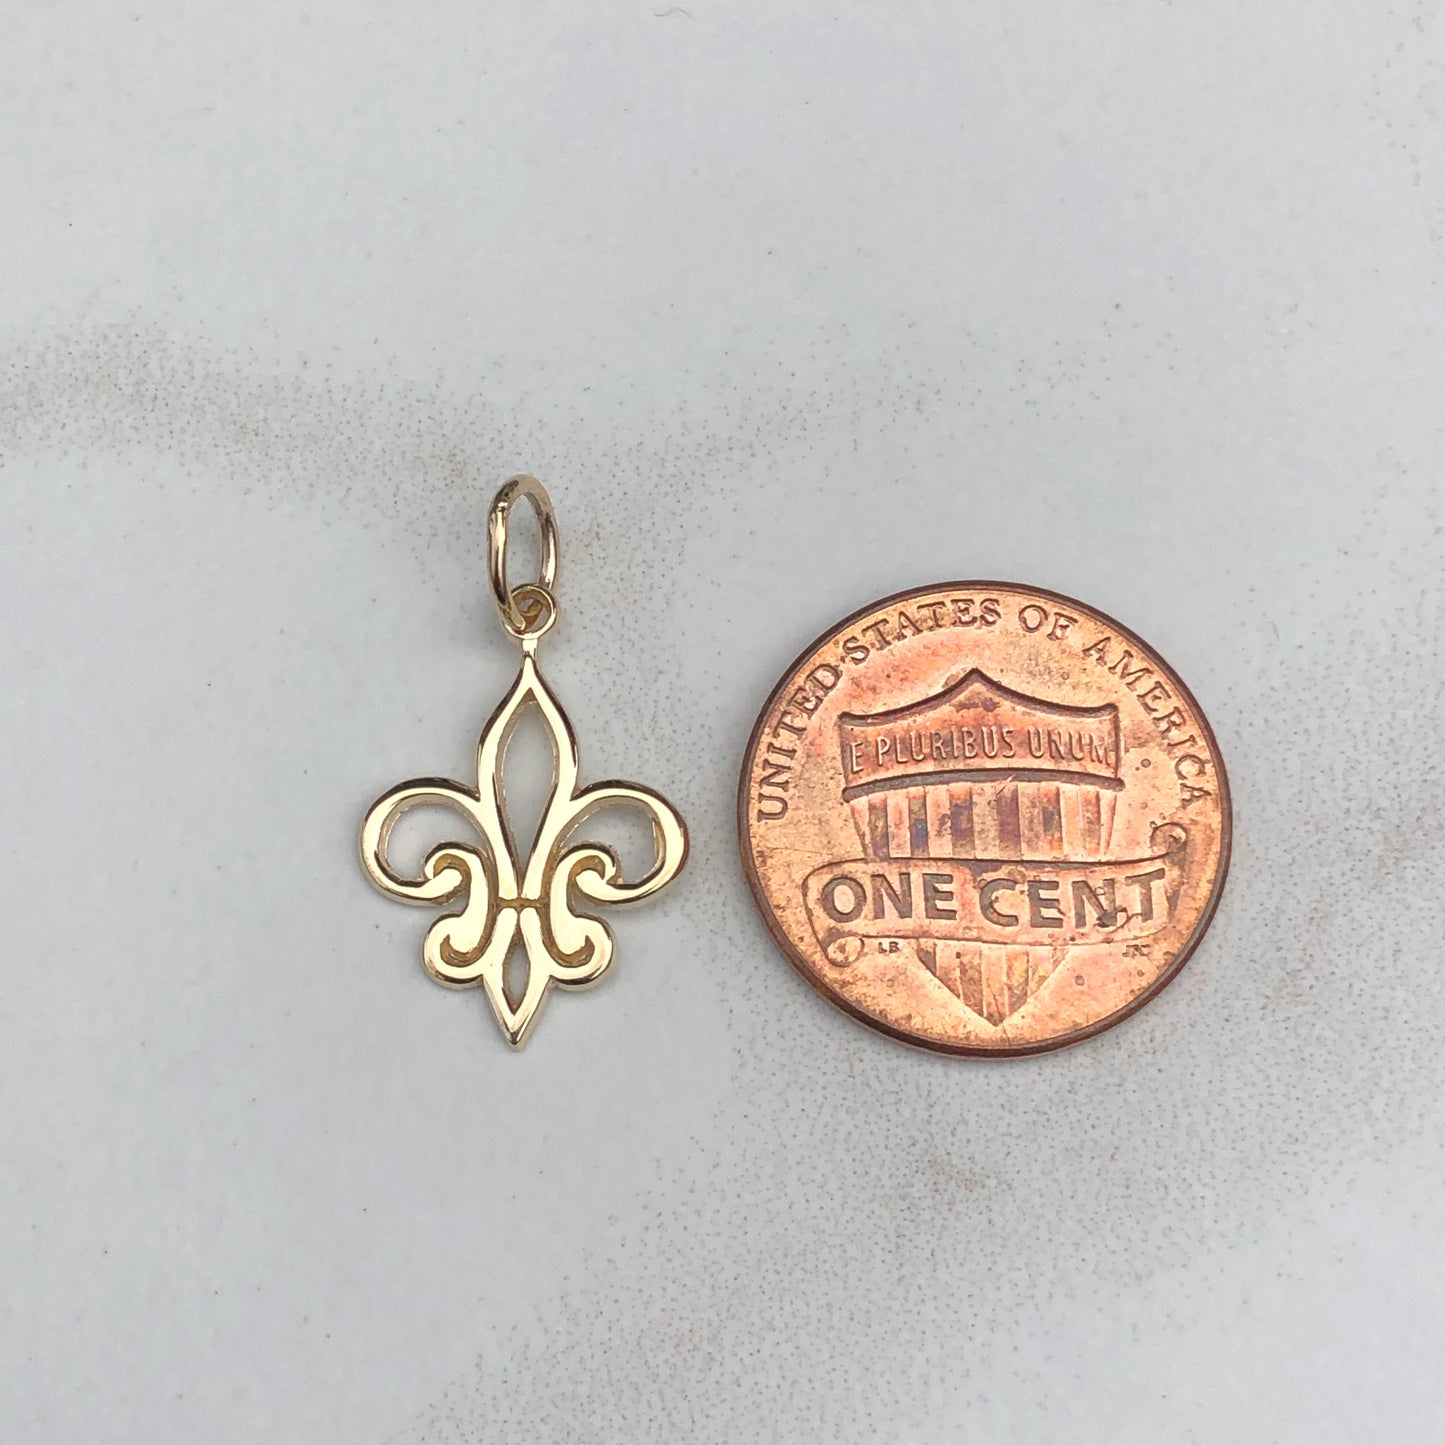 OOO 14KT Yellow Gold Small Cut-Out Fleur de Lis Pendant Charm, OOO 14KT Yellow Gold Small Cut-Out Fleur de Lis Pendant Charm - Legacy Saint Jewelry